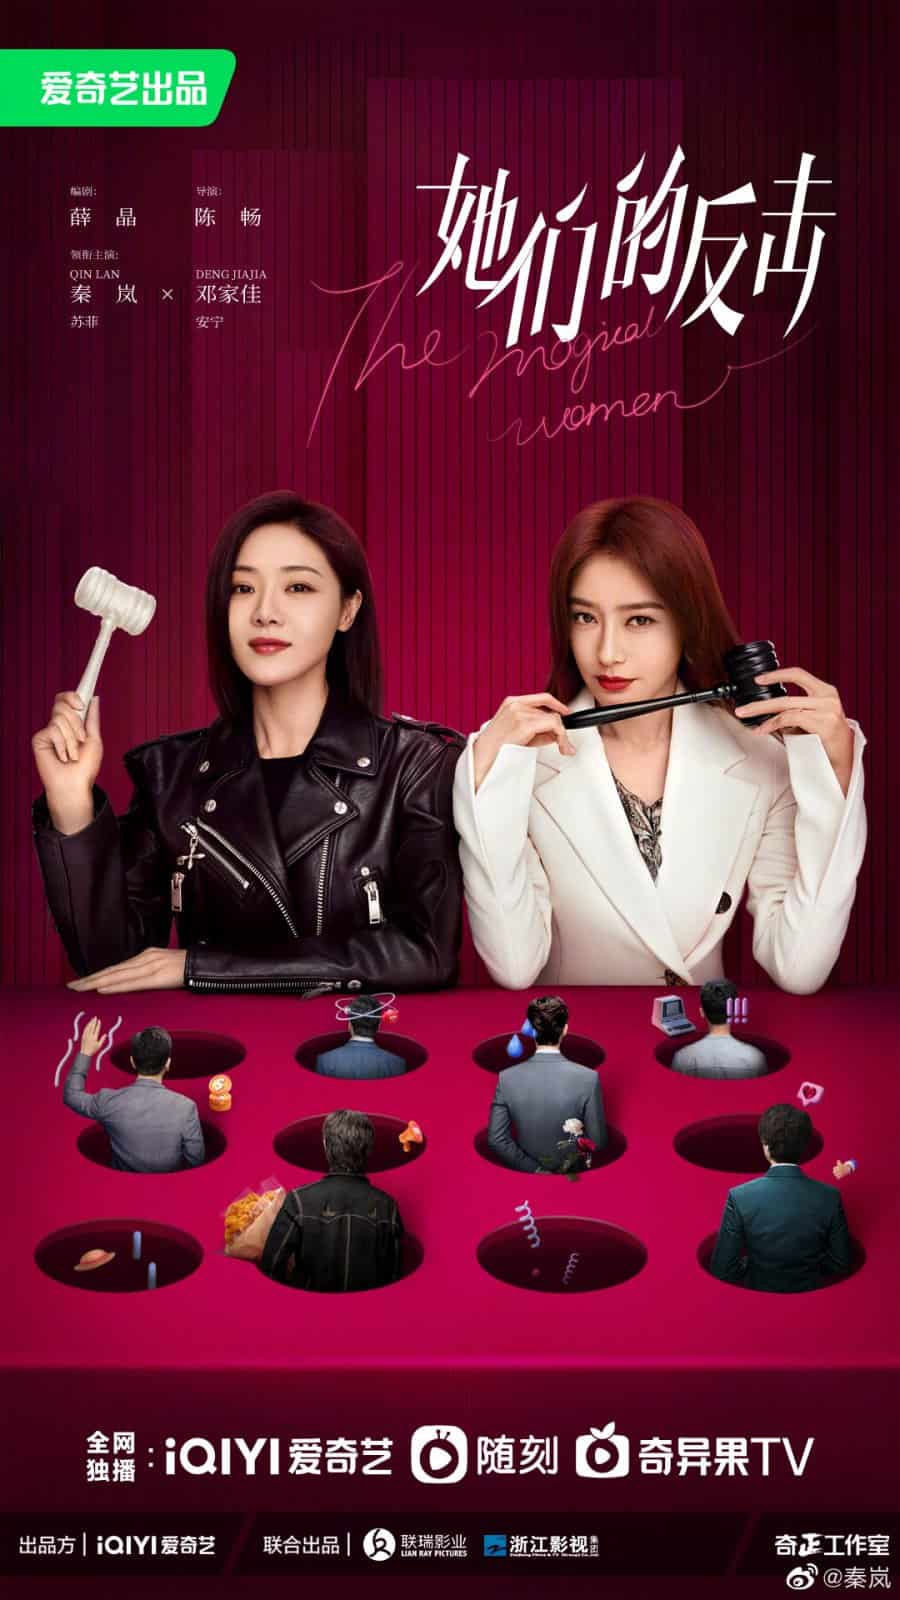 The Magical Women - Sinopsis, Pemain, OST, Episode, Review